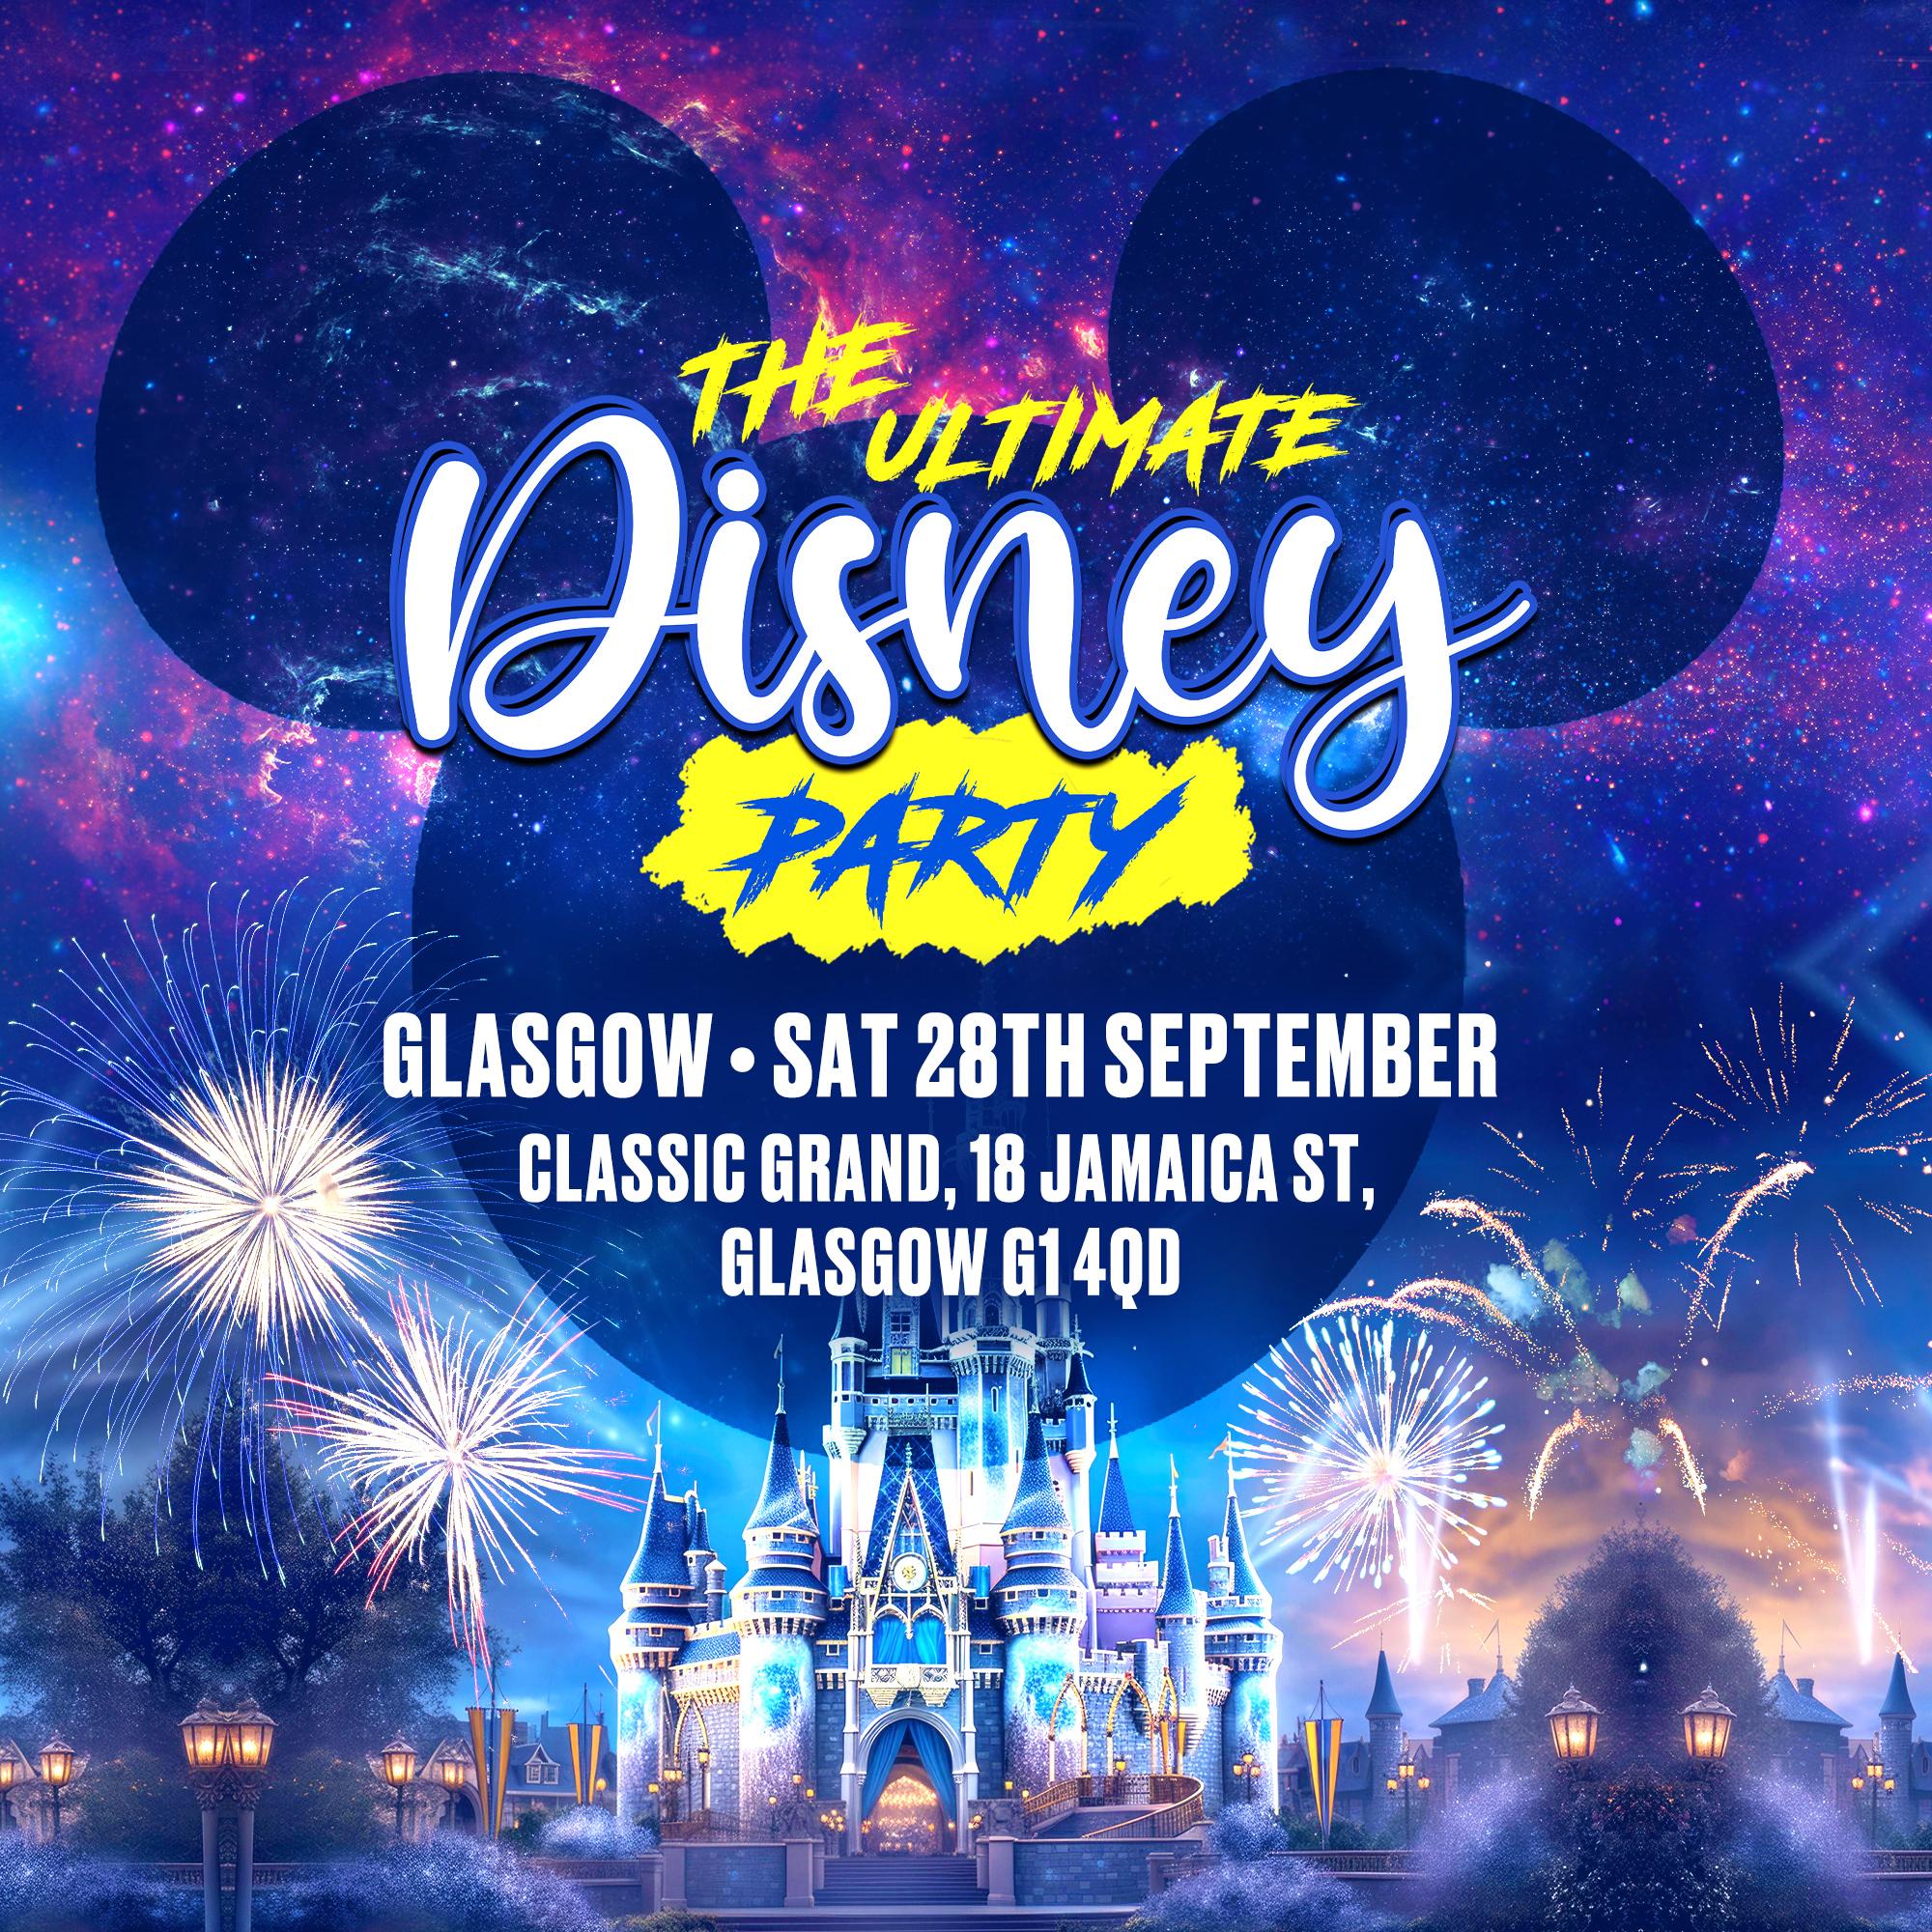 The Ultimate Disney Party - Glasgow